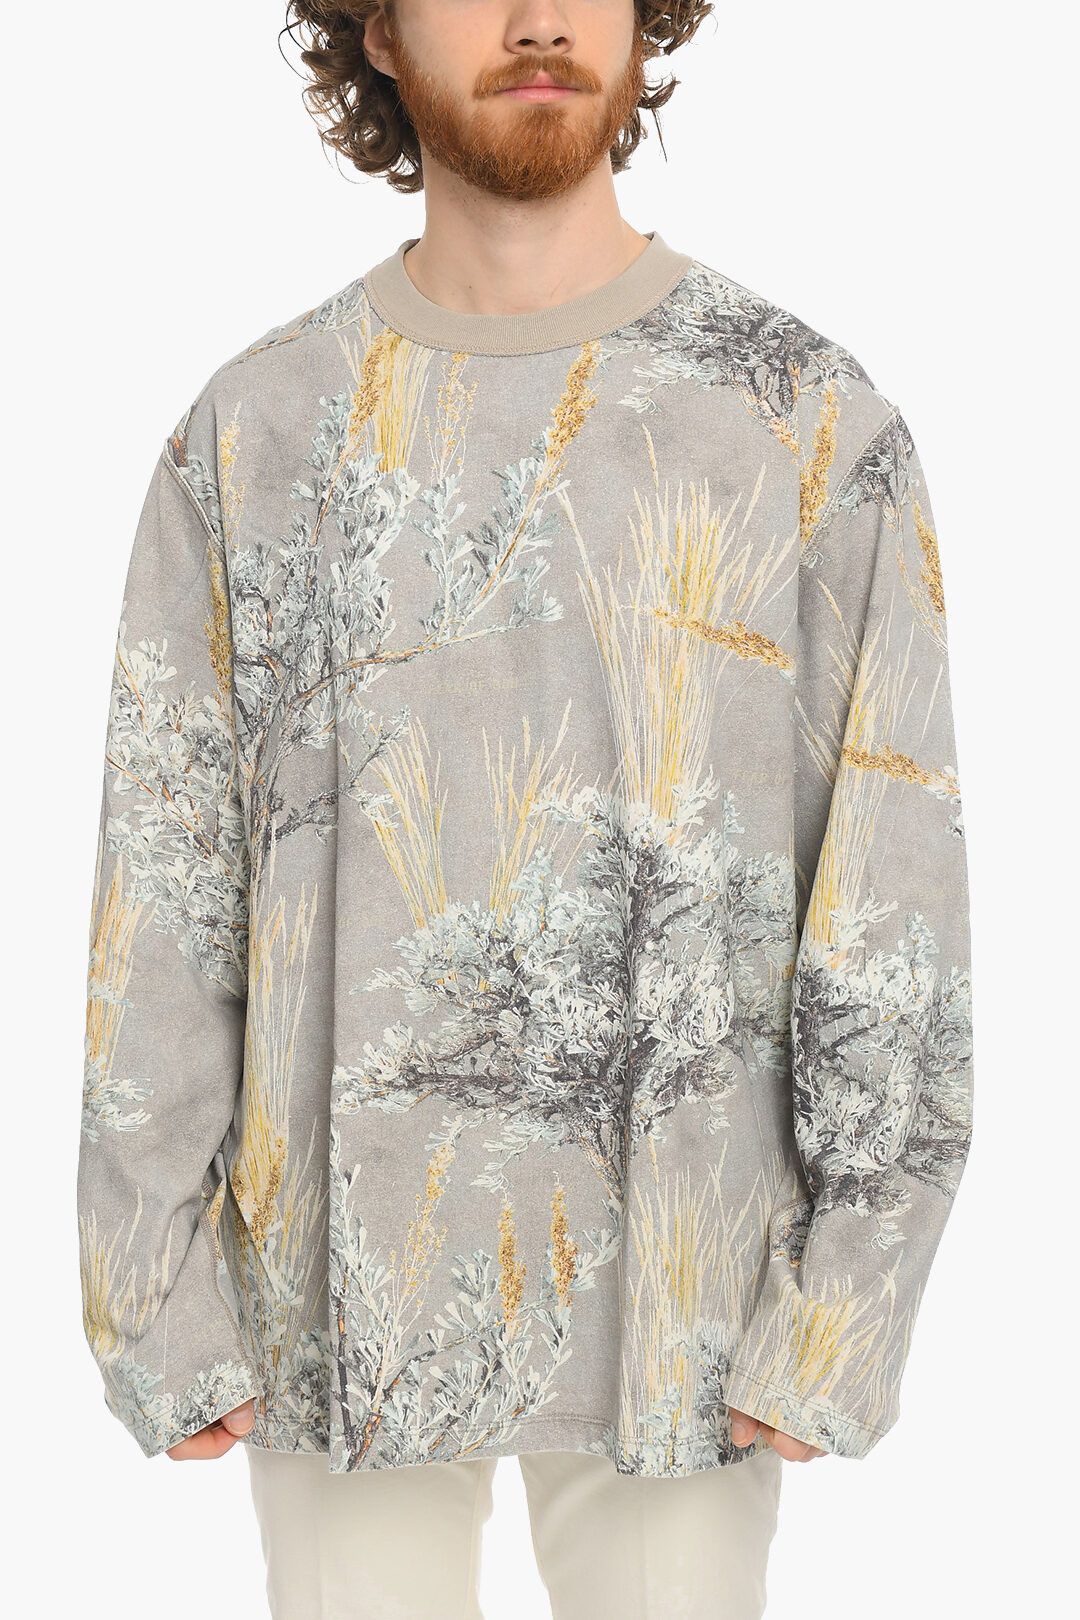 Fear of God Fear Of God 6th Collection All-Over Print Longsleeve ...